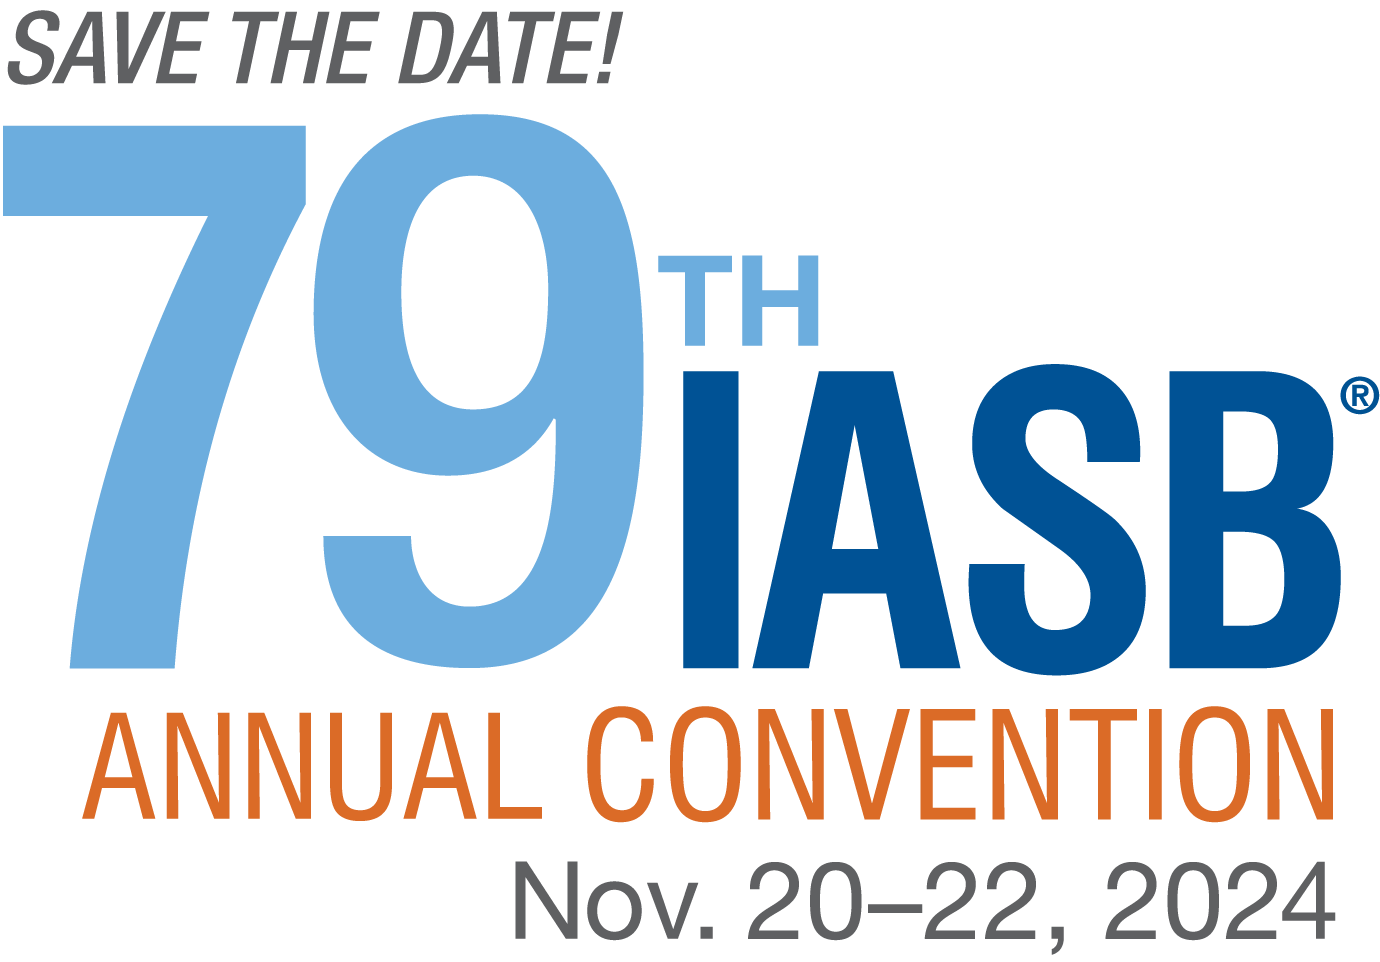 Logo: 79th IASB Annual Convention Save the Date